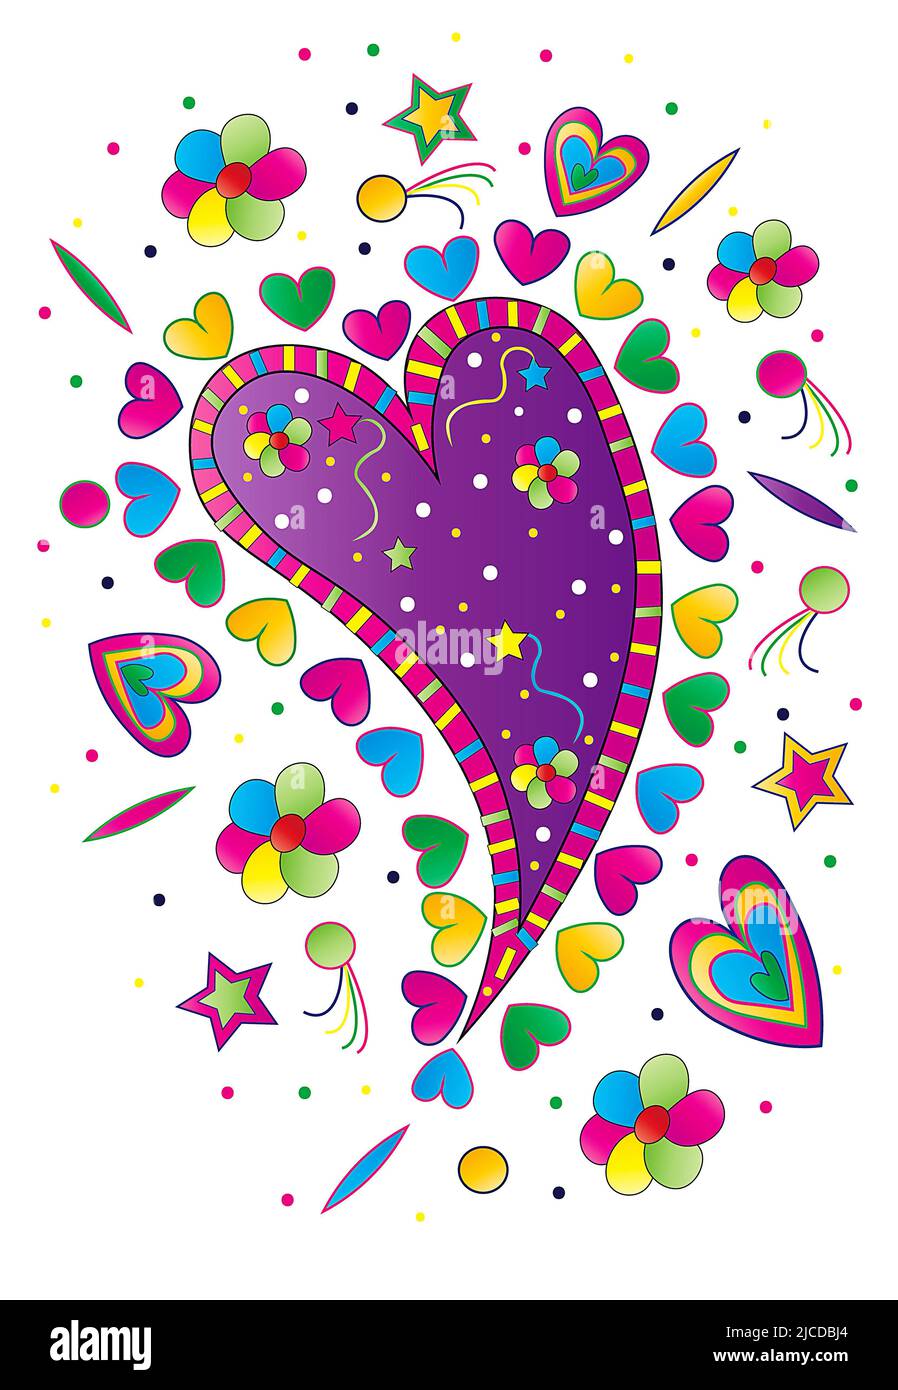 Abstract illustration of colorful hearts and confetti Stock Photo